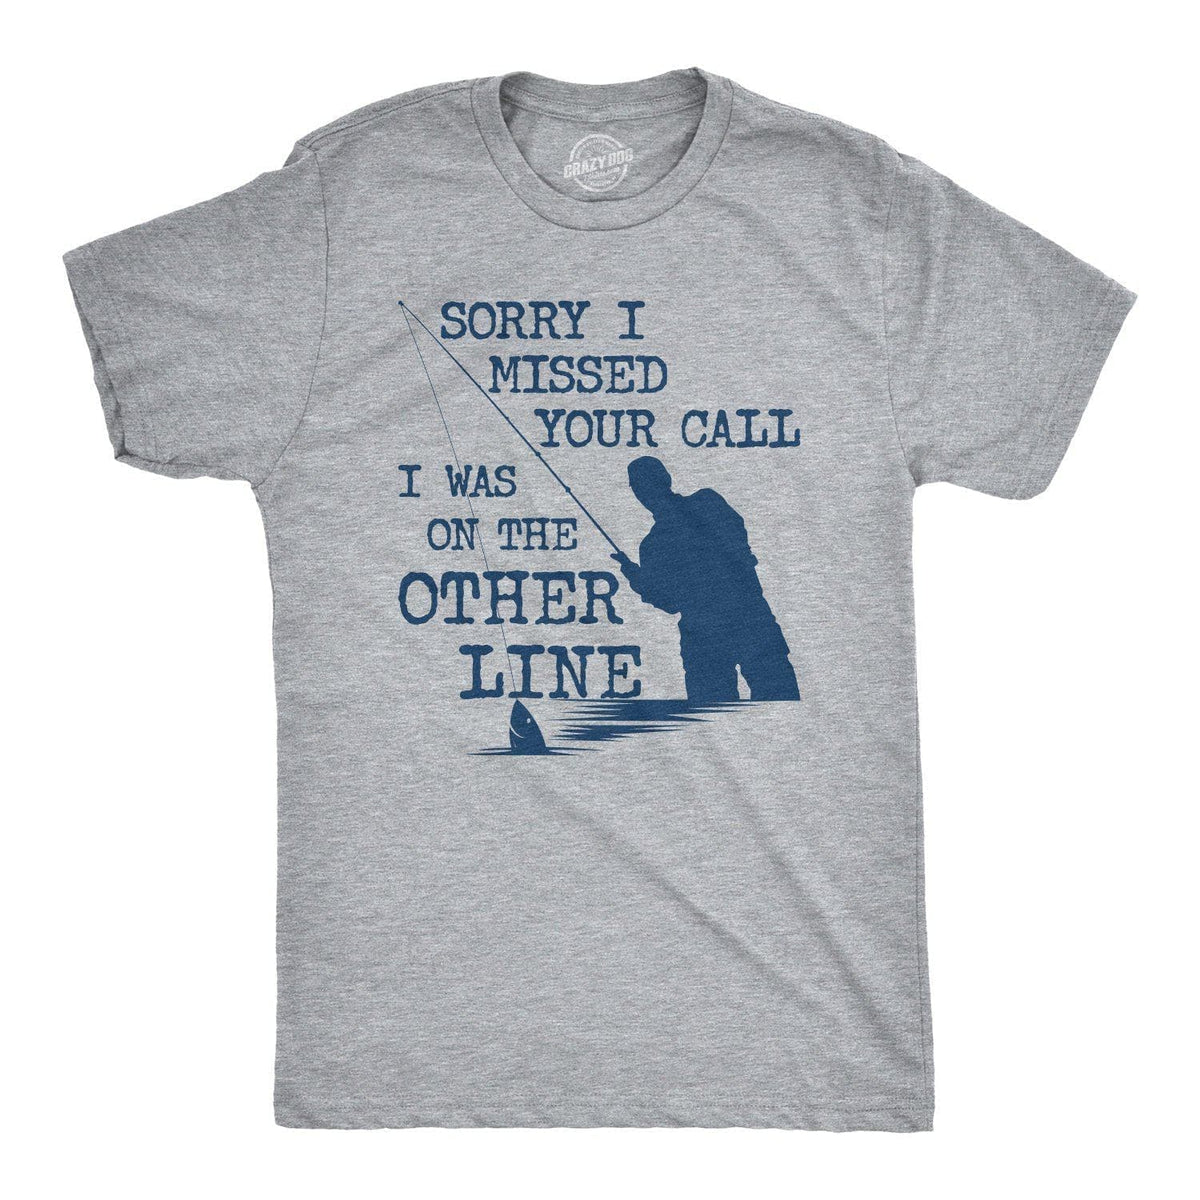 https://www.crazydogtshirts.com/cdn/shop/products/crazy-dog-t-shirts-mens-t-shirts-sorry-i-missed-your-call-i-was-on-the-other-line-men-s-tshirt-28527373058163_1200x.jpg?v=1631951882